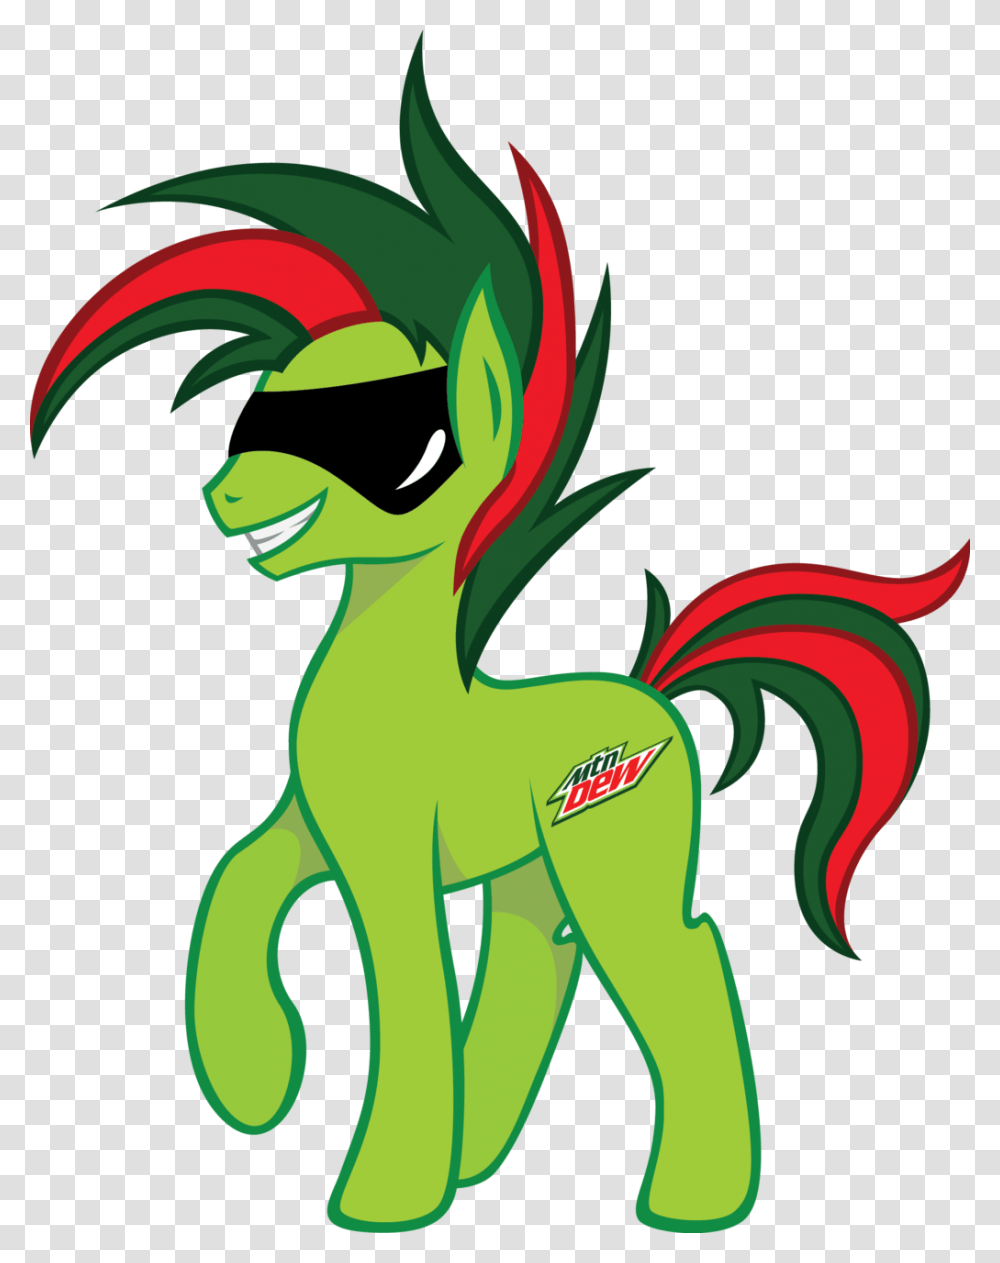 Mountain Dew Pony By Blueaquamarinespark Background Mountain Dew Can, Dragon Transparent Png